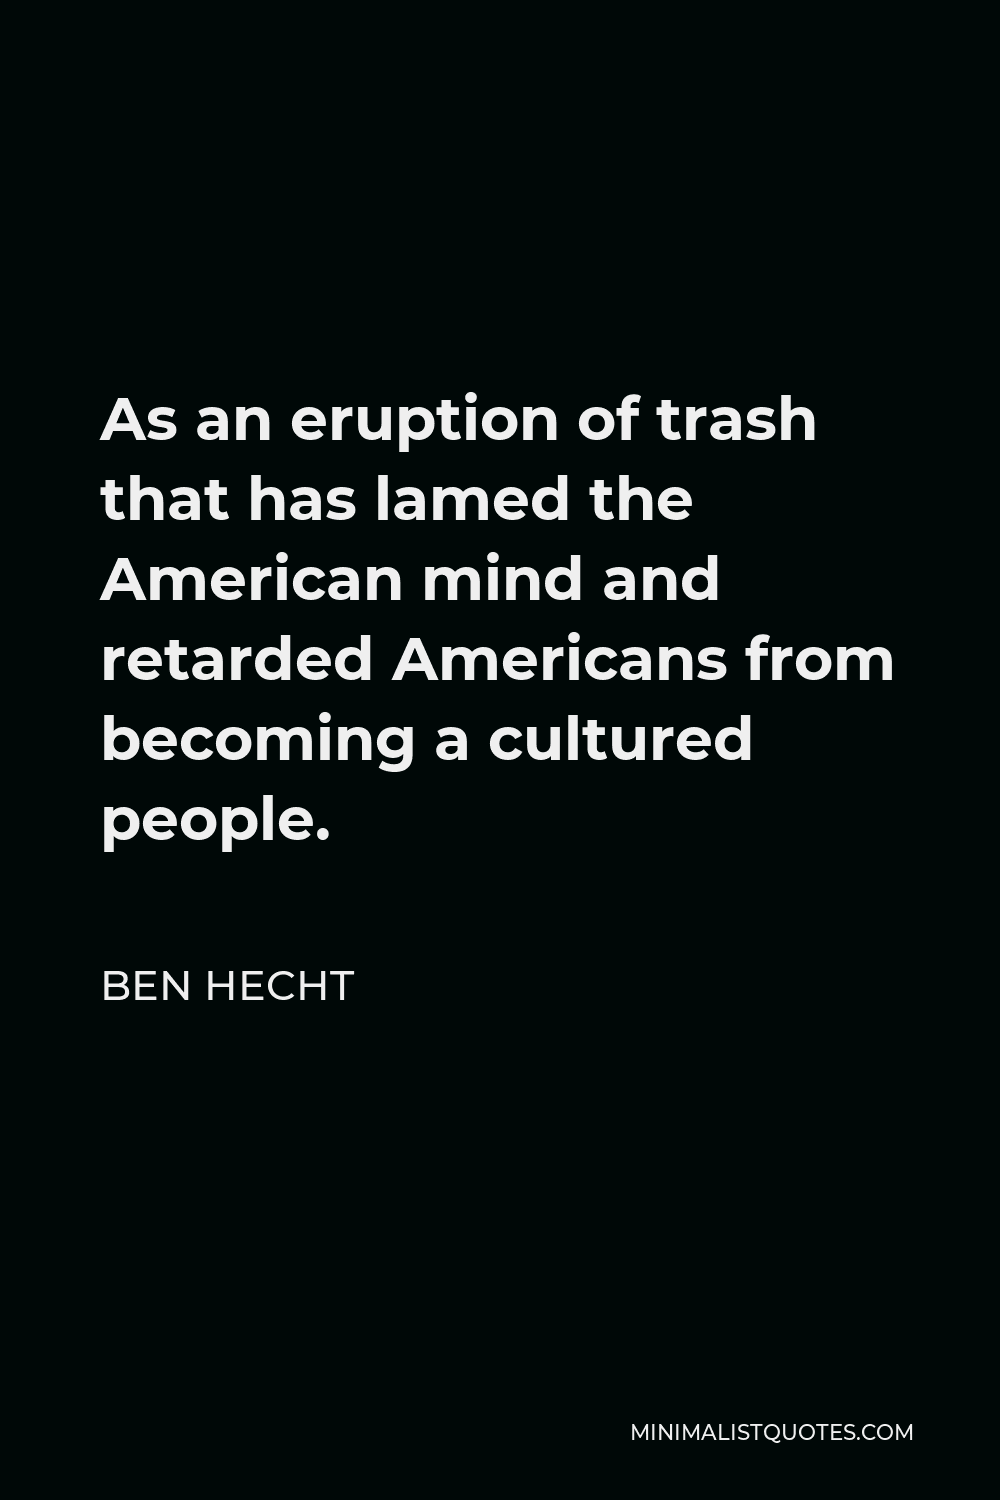 Ben Hecht Quote - As an eruption of trash that has lamed the American mind and retarded Americans from becoming a cultured people.